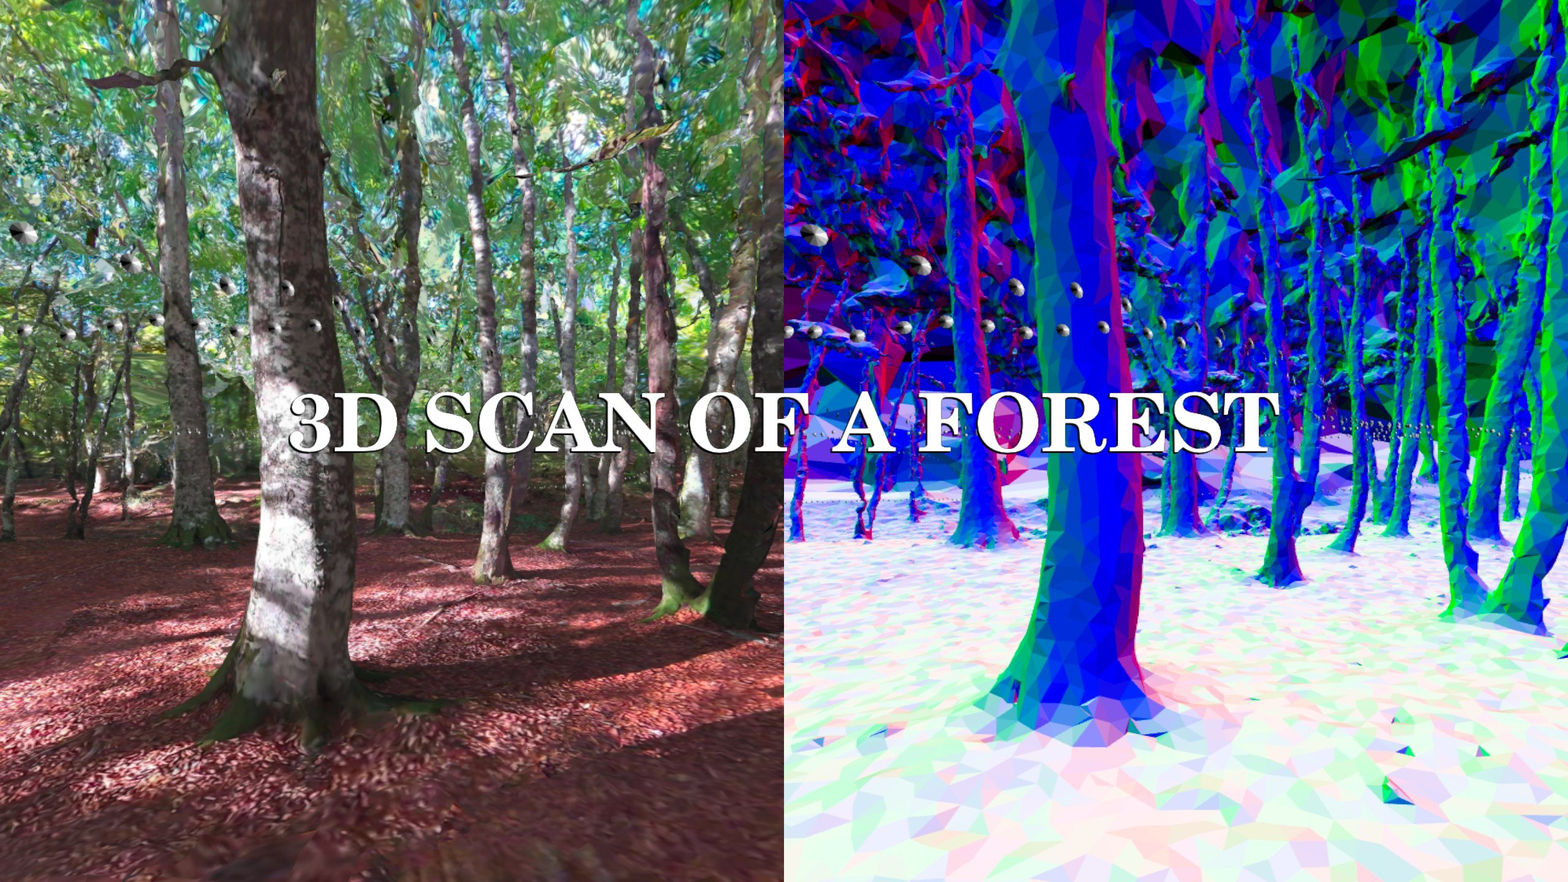 3D scan of a forest